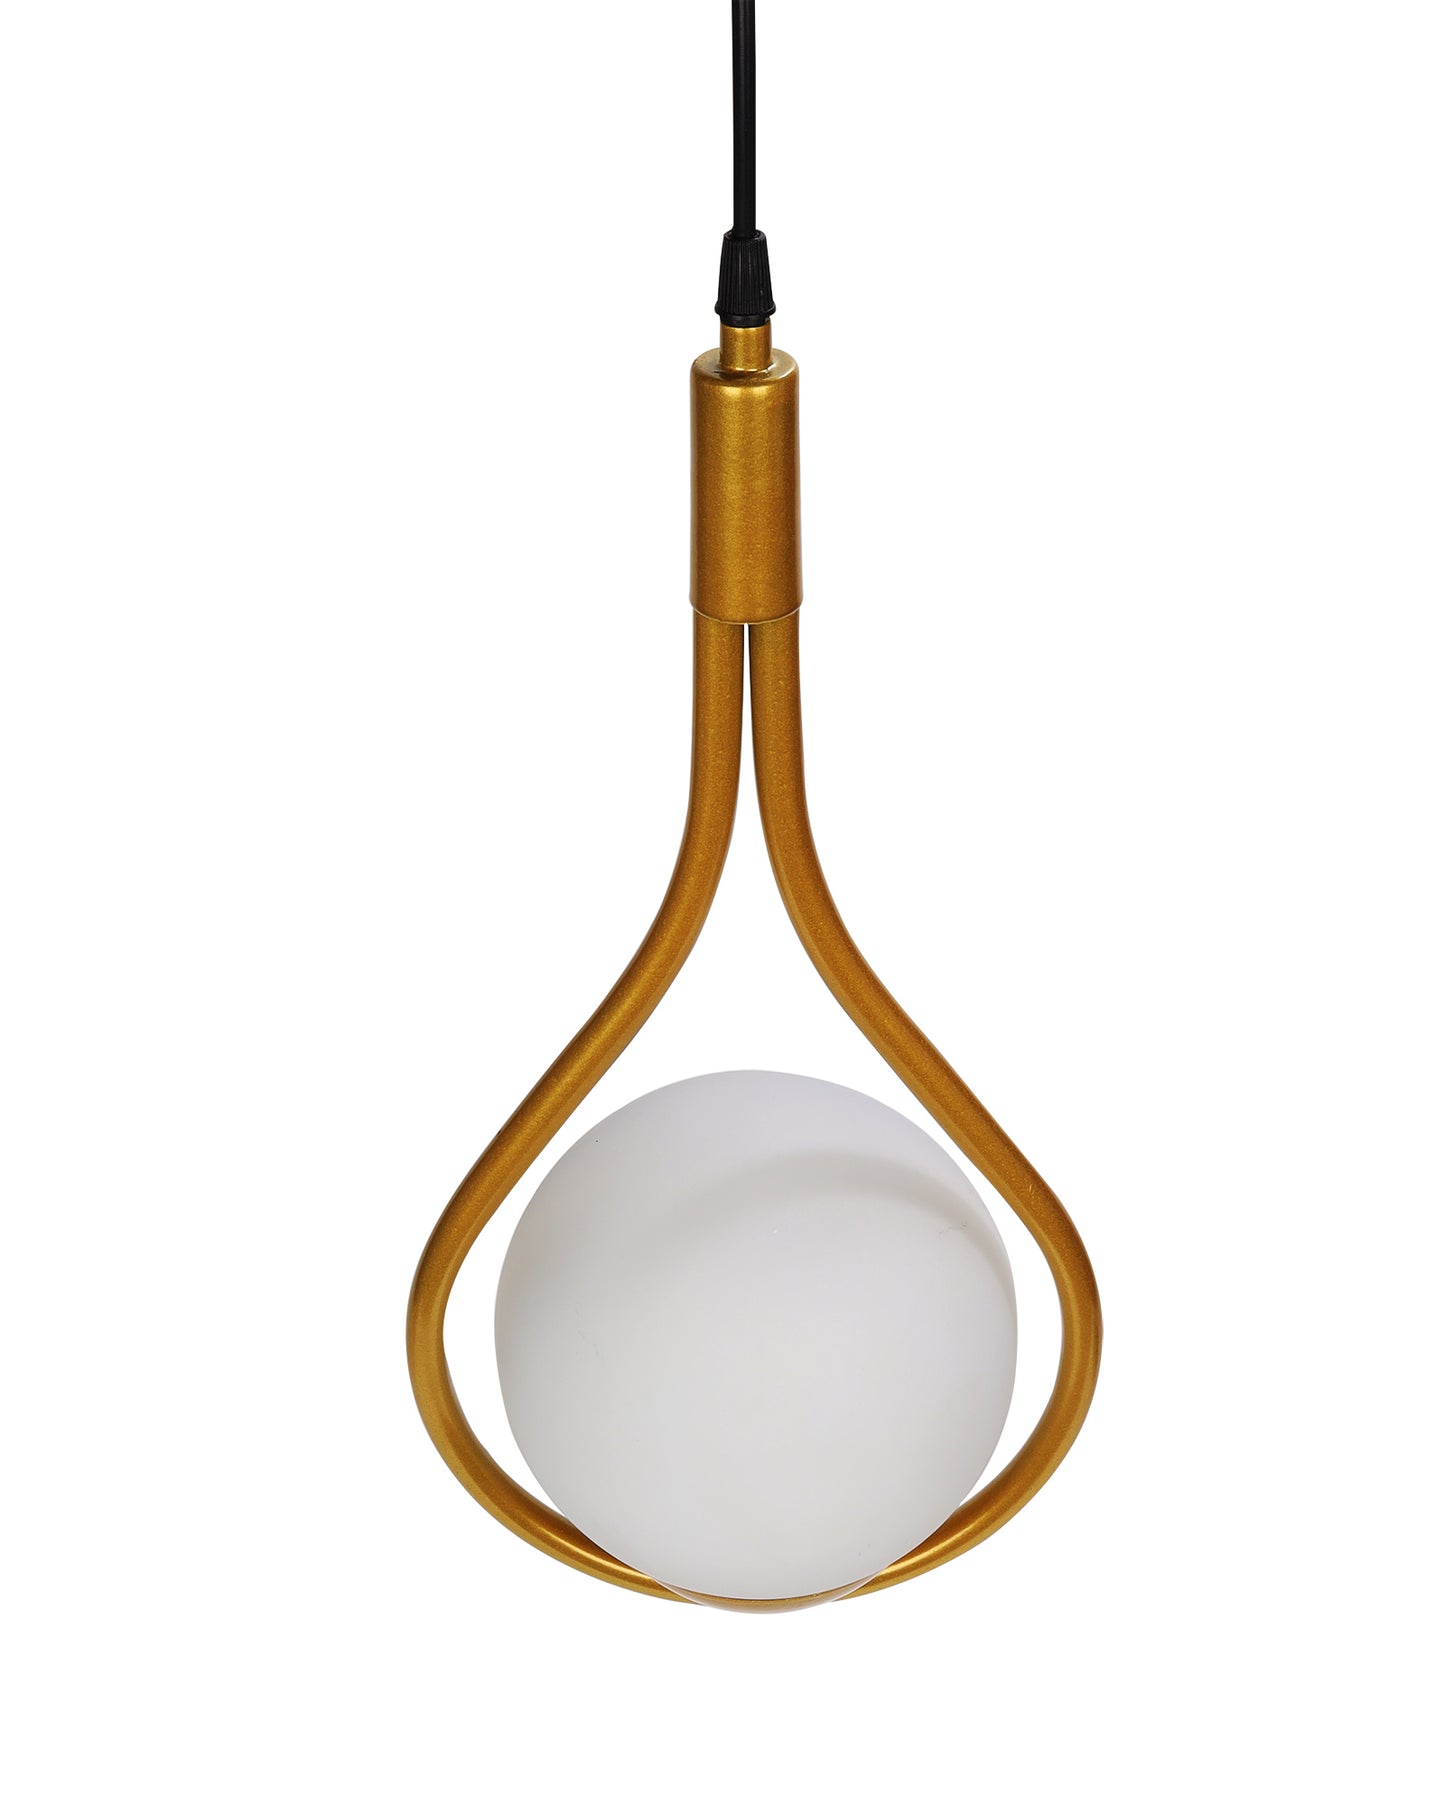 Mid Century Modern Light Chandelier Lighting, White Frosted Glass Globe Lampshade Pendant Indoor Hanging Light Fixture, Rubbed Bronze water drop